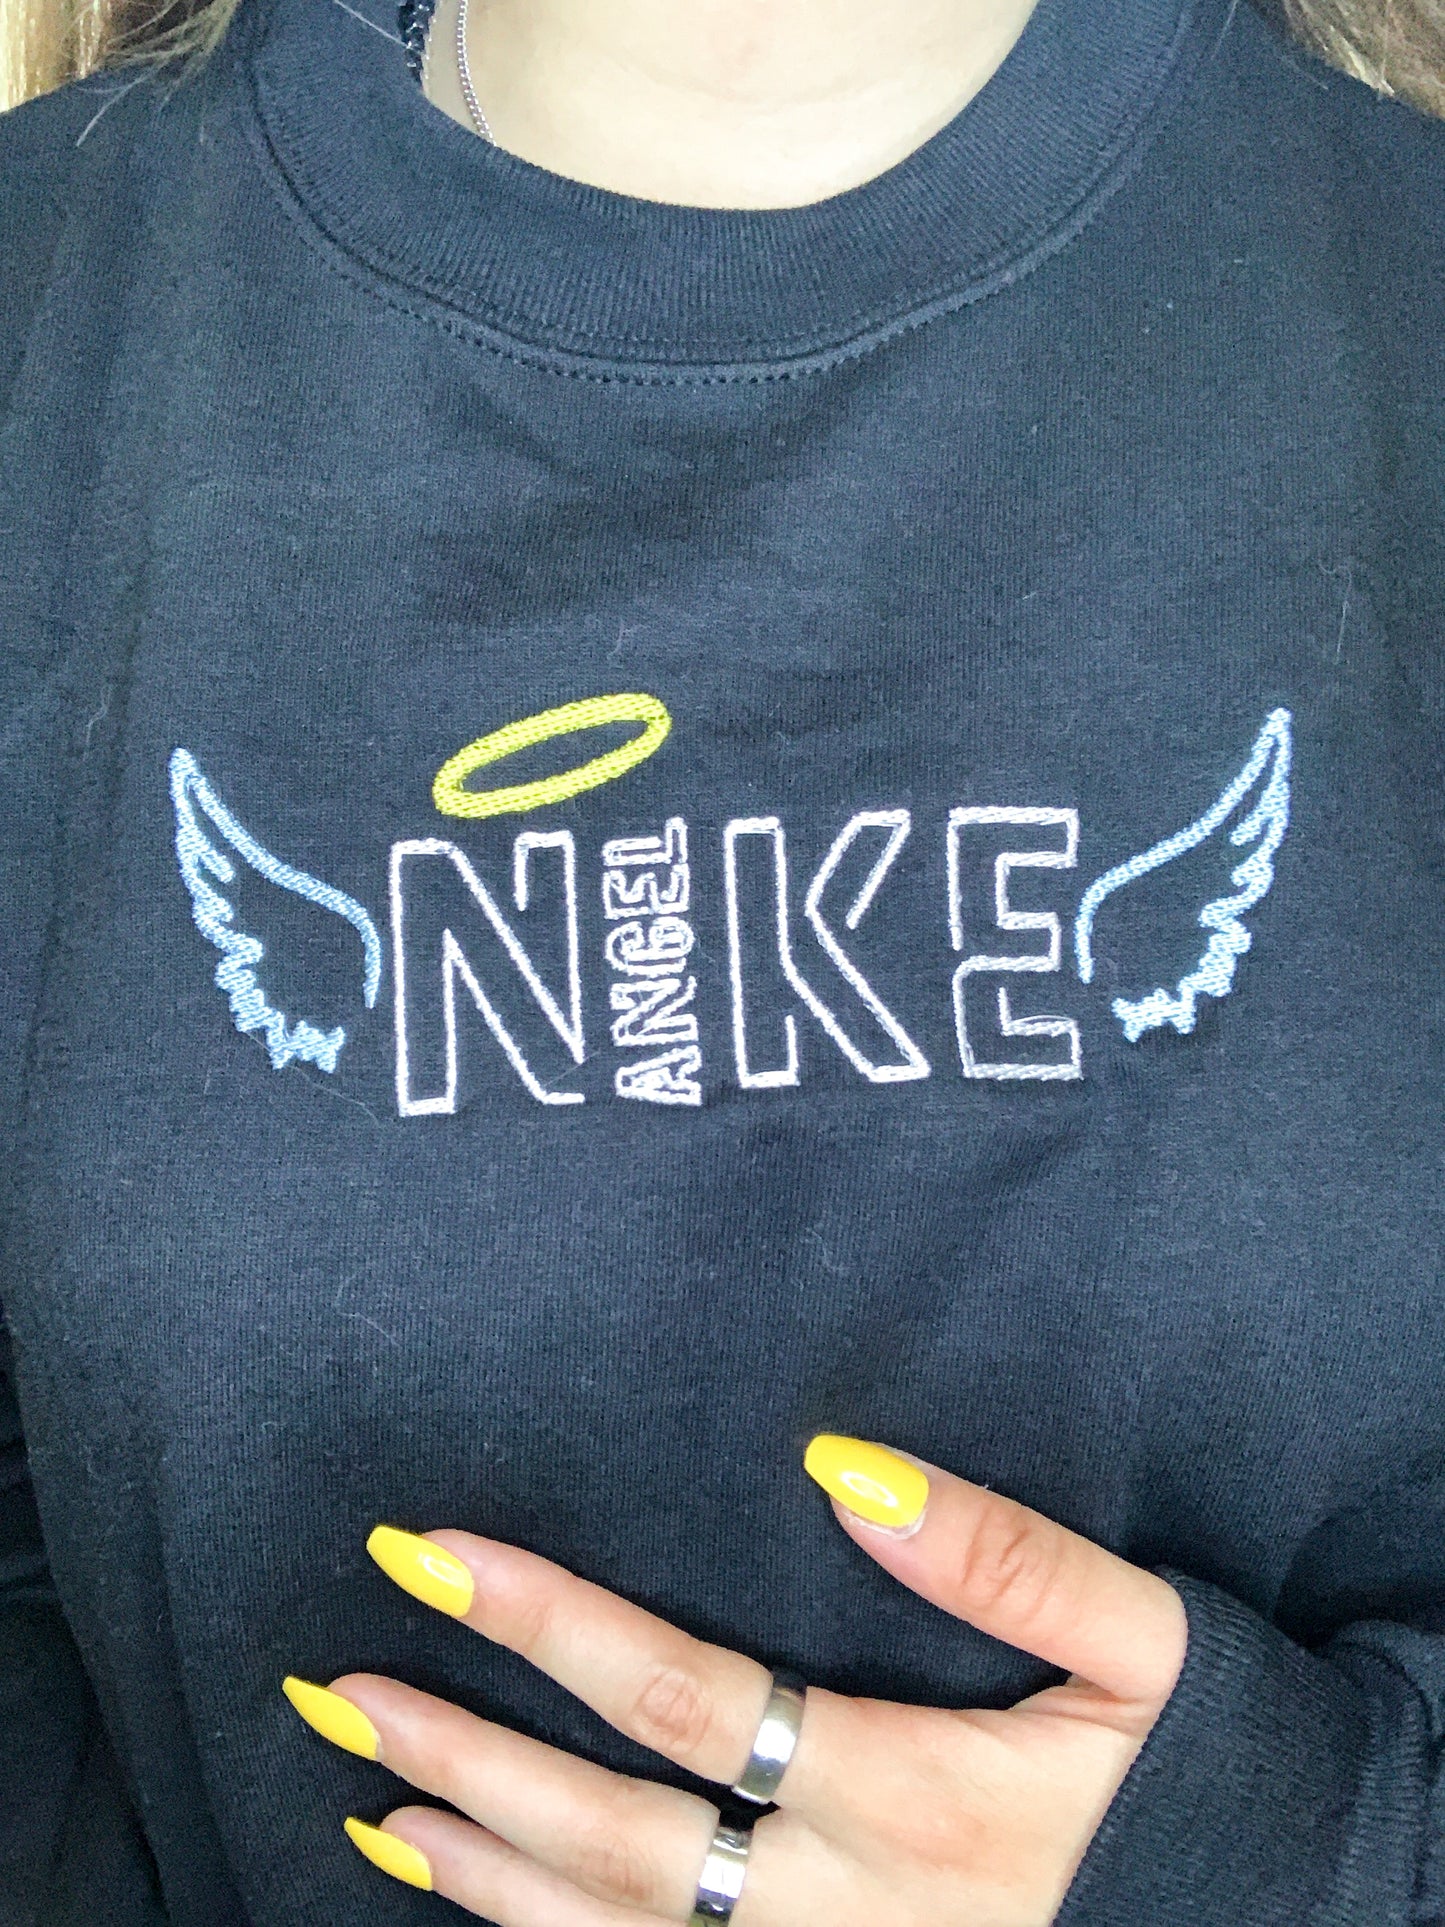 NKE Angel Spellout Embroidery